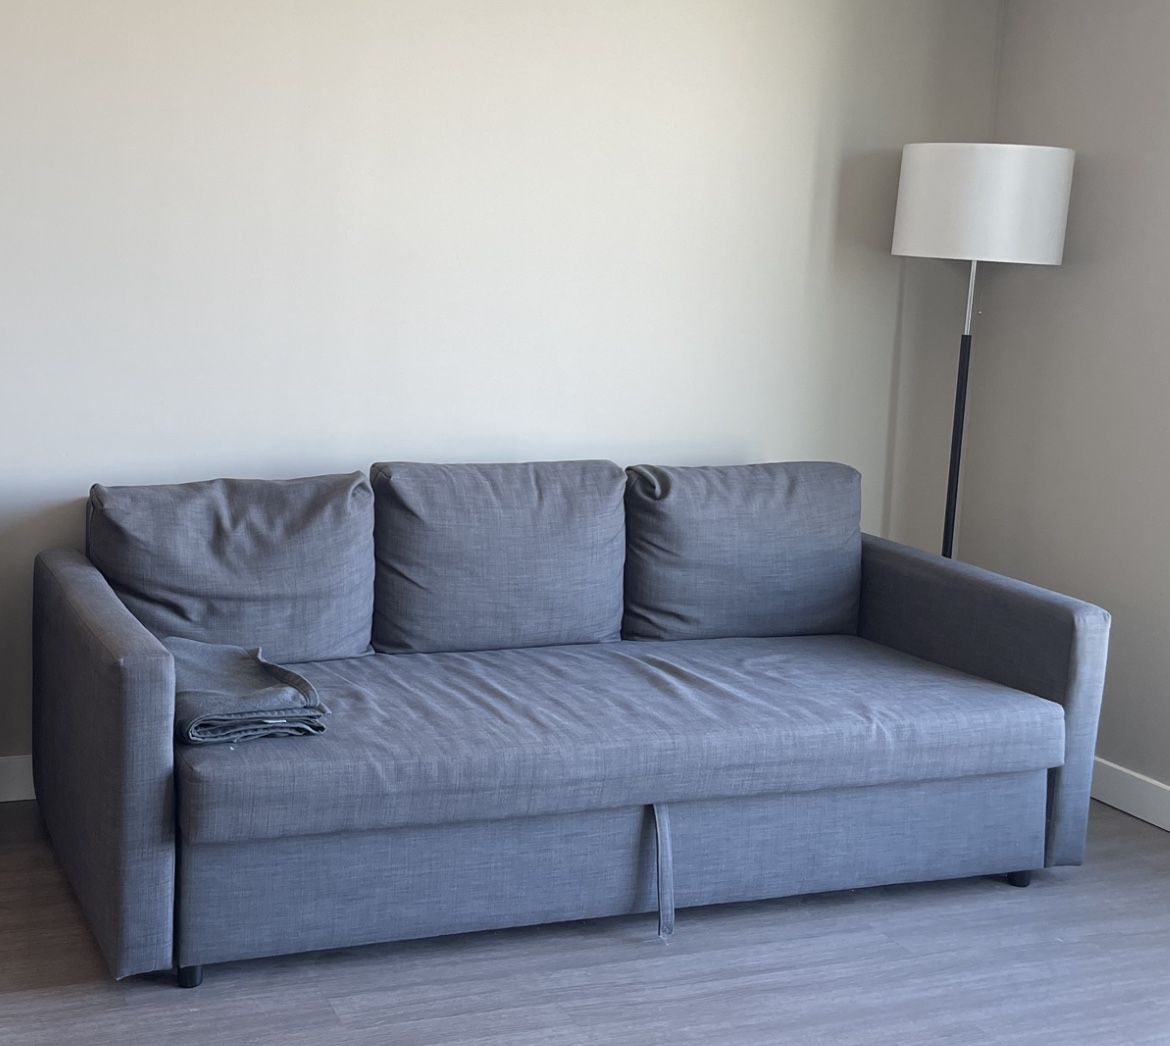 IKEA Couch And Lamp For $300